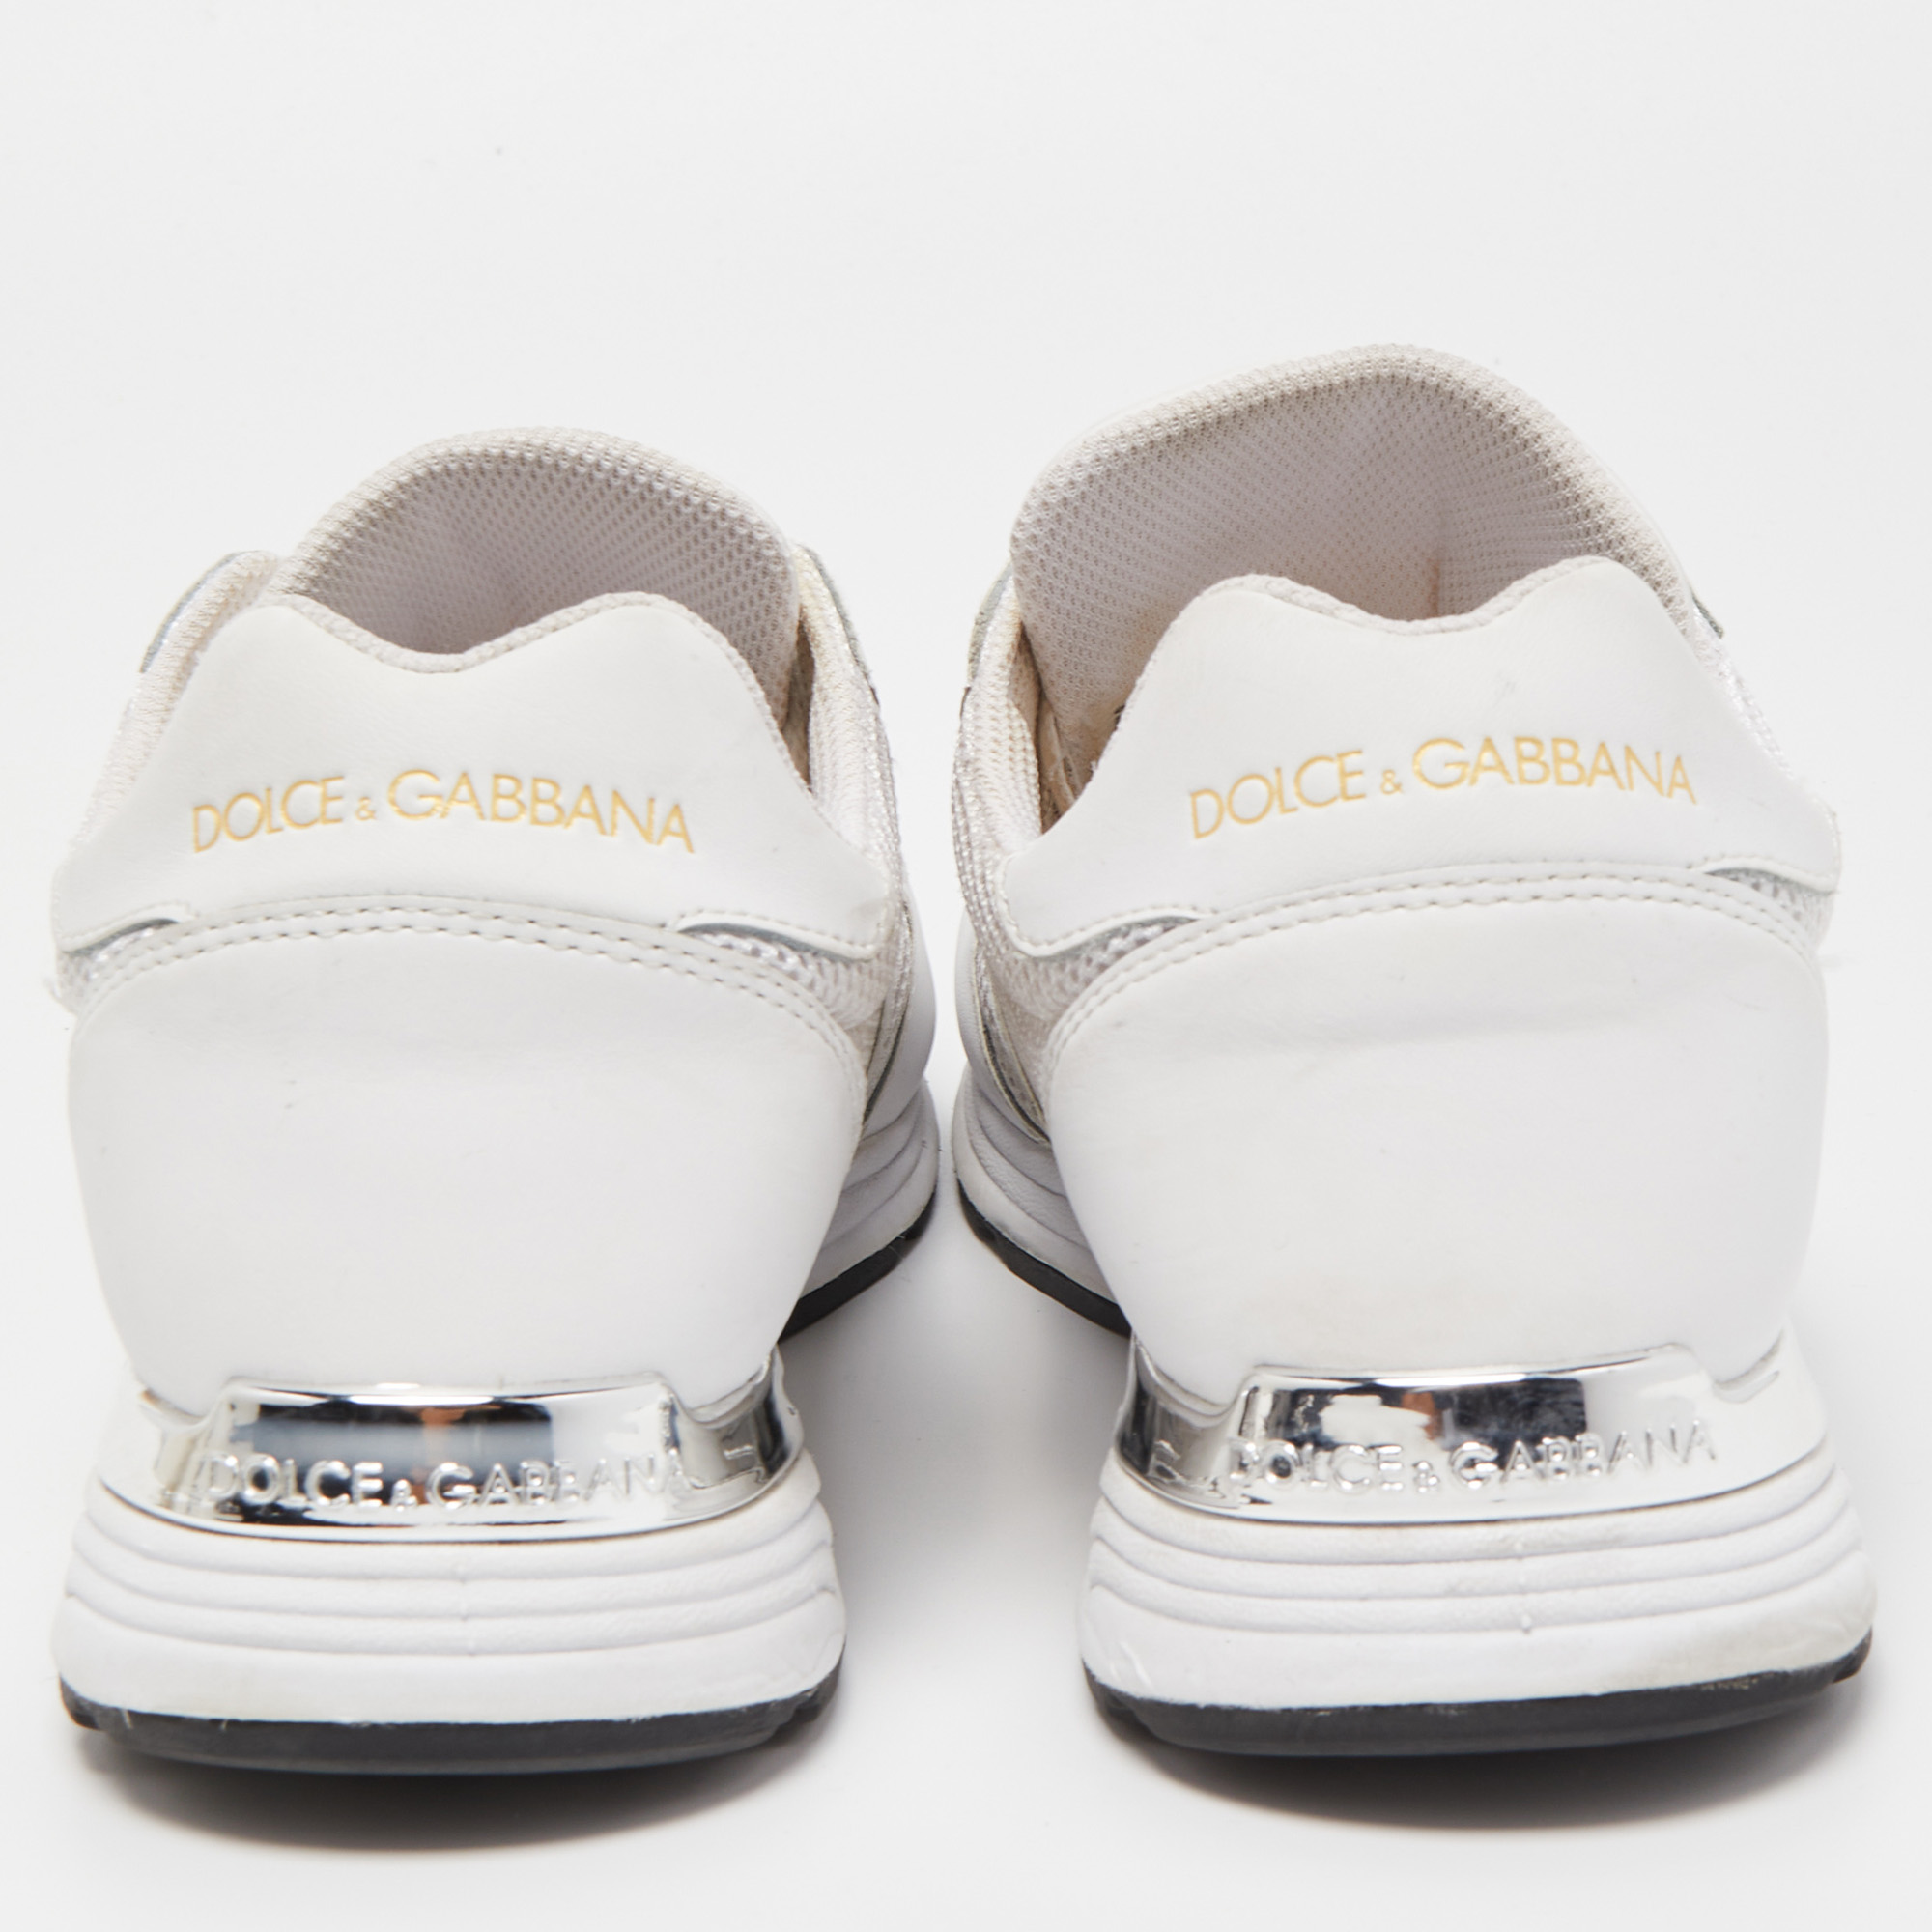 Dolce & Gabbana White Leather And Mesh Low Top Sneakers Size 42